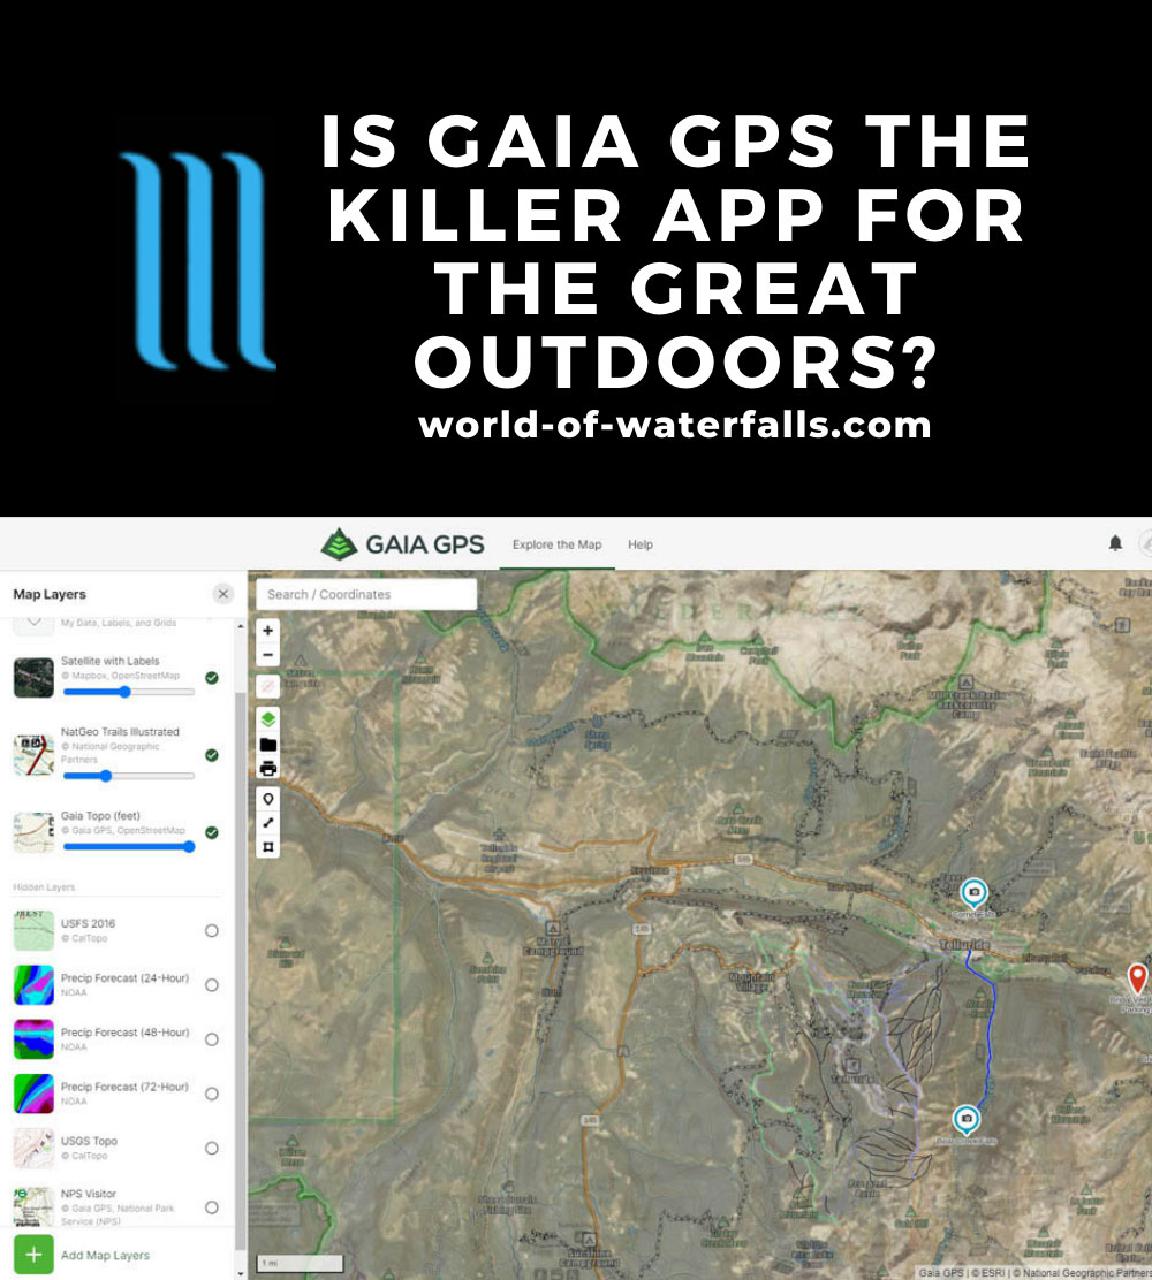 Gaia GPS viewed on the gaiagps.com website for trip planning purposes with premium layers on top of the base layer